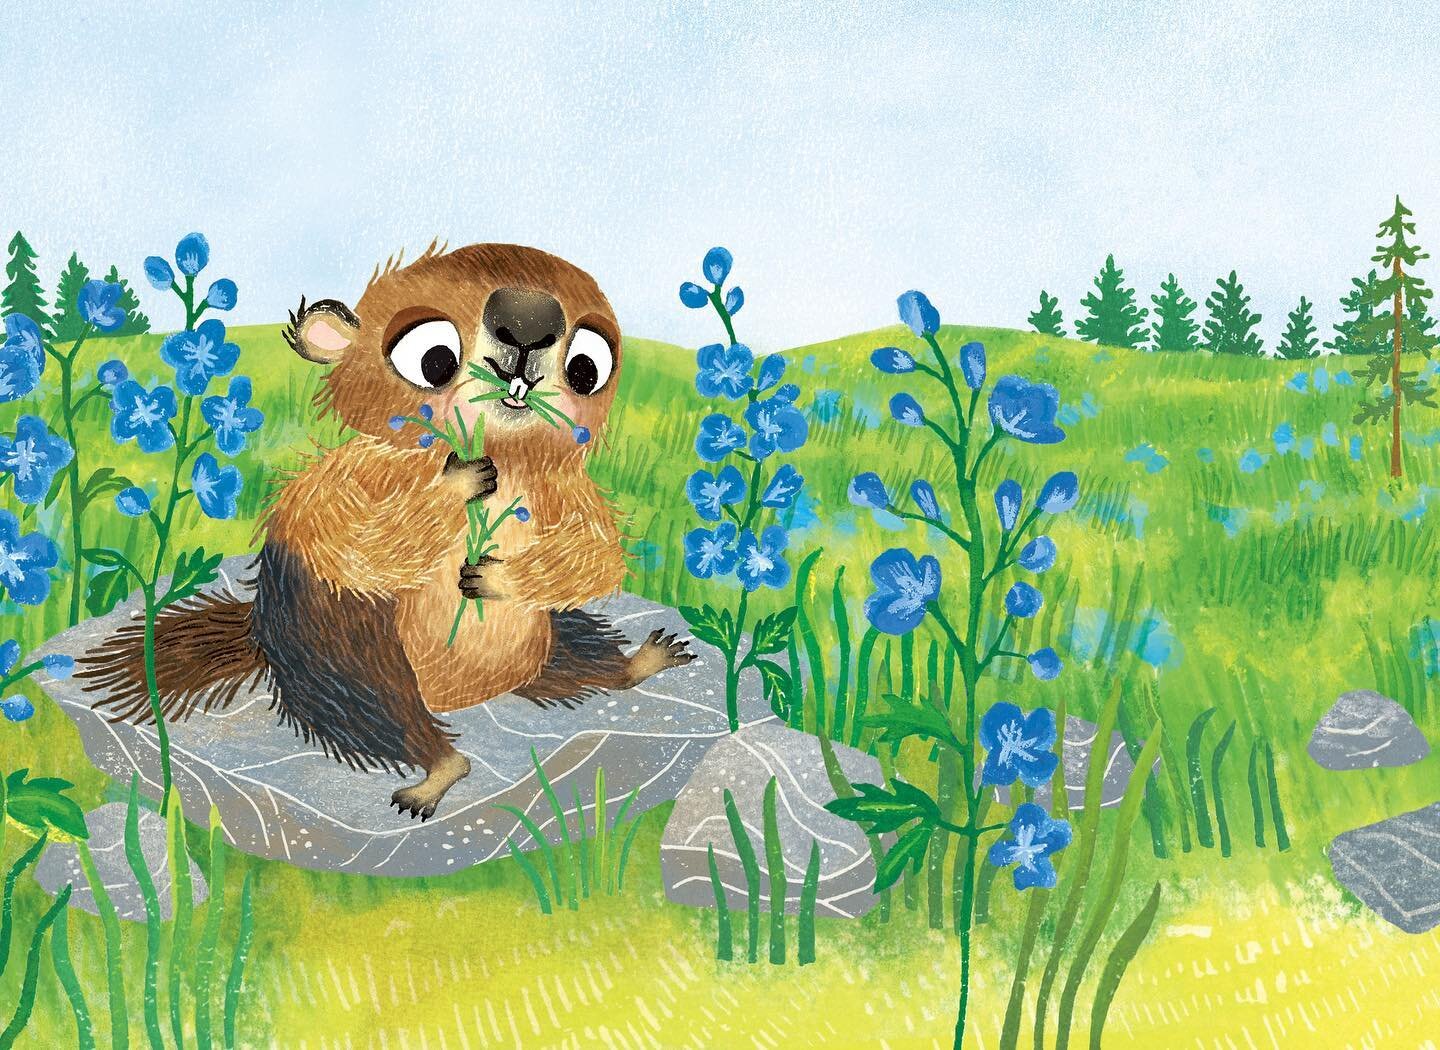 🌸 Spring is on its way and it reminds me of this scene of marmot munching on wildflowers from I AM FRIENDLY written by Kristen Tracy. Available May 21 by @mackidsbooks